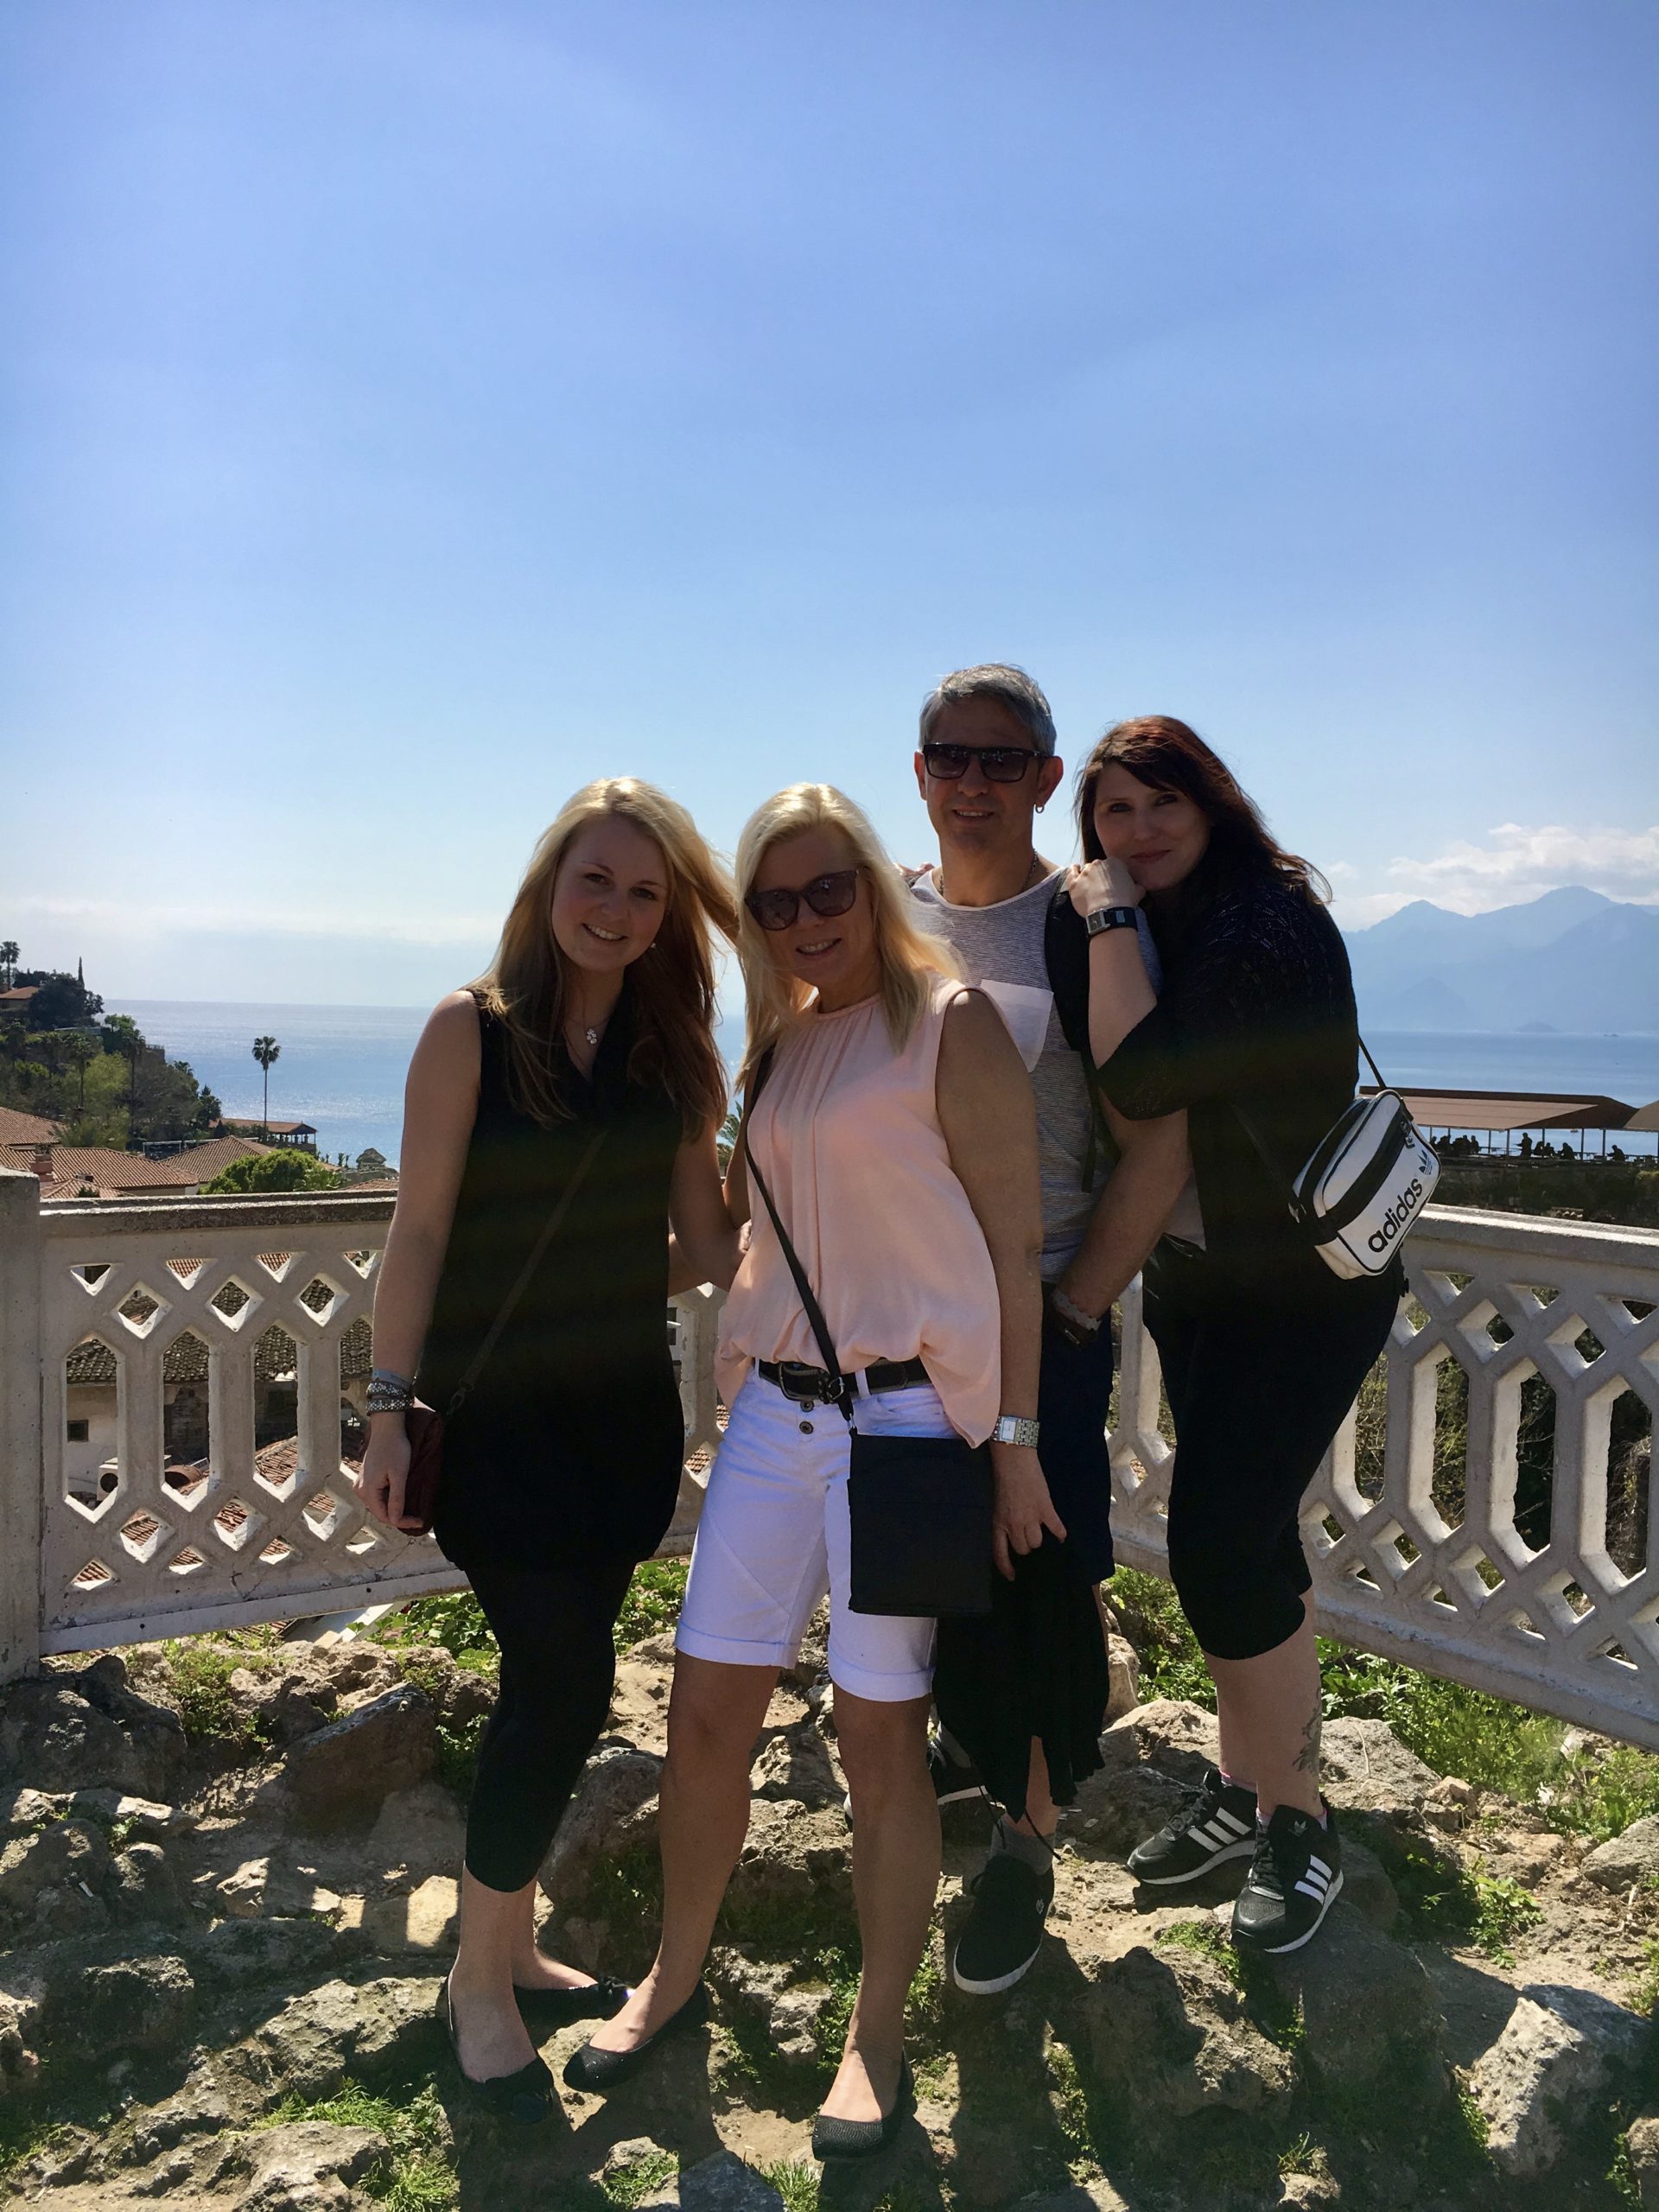 Antalya – discovering the beautiful Turkish city away from the beach